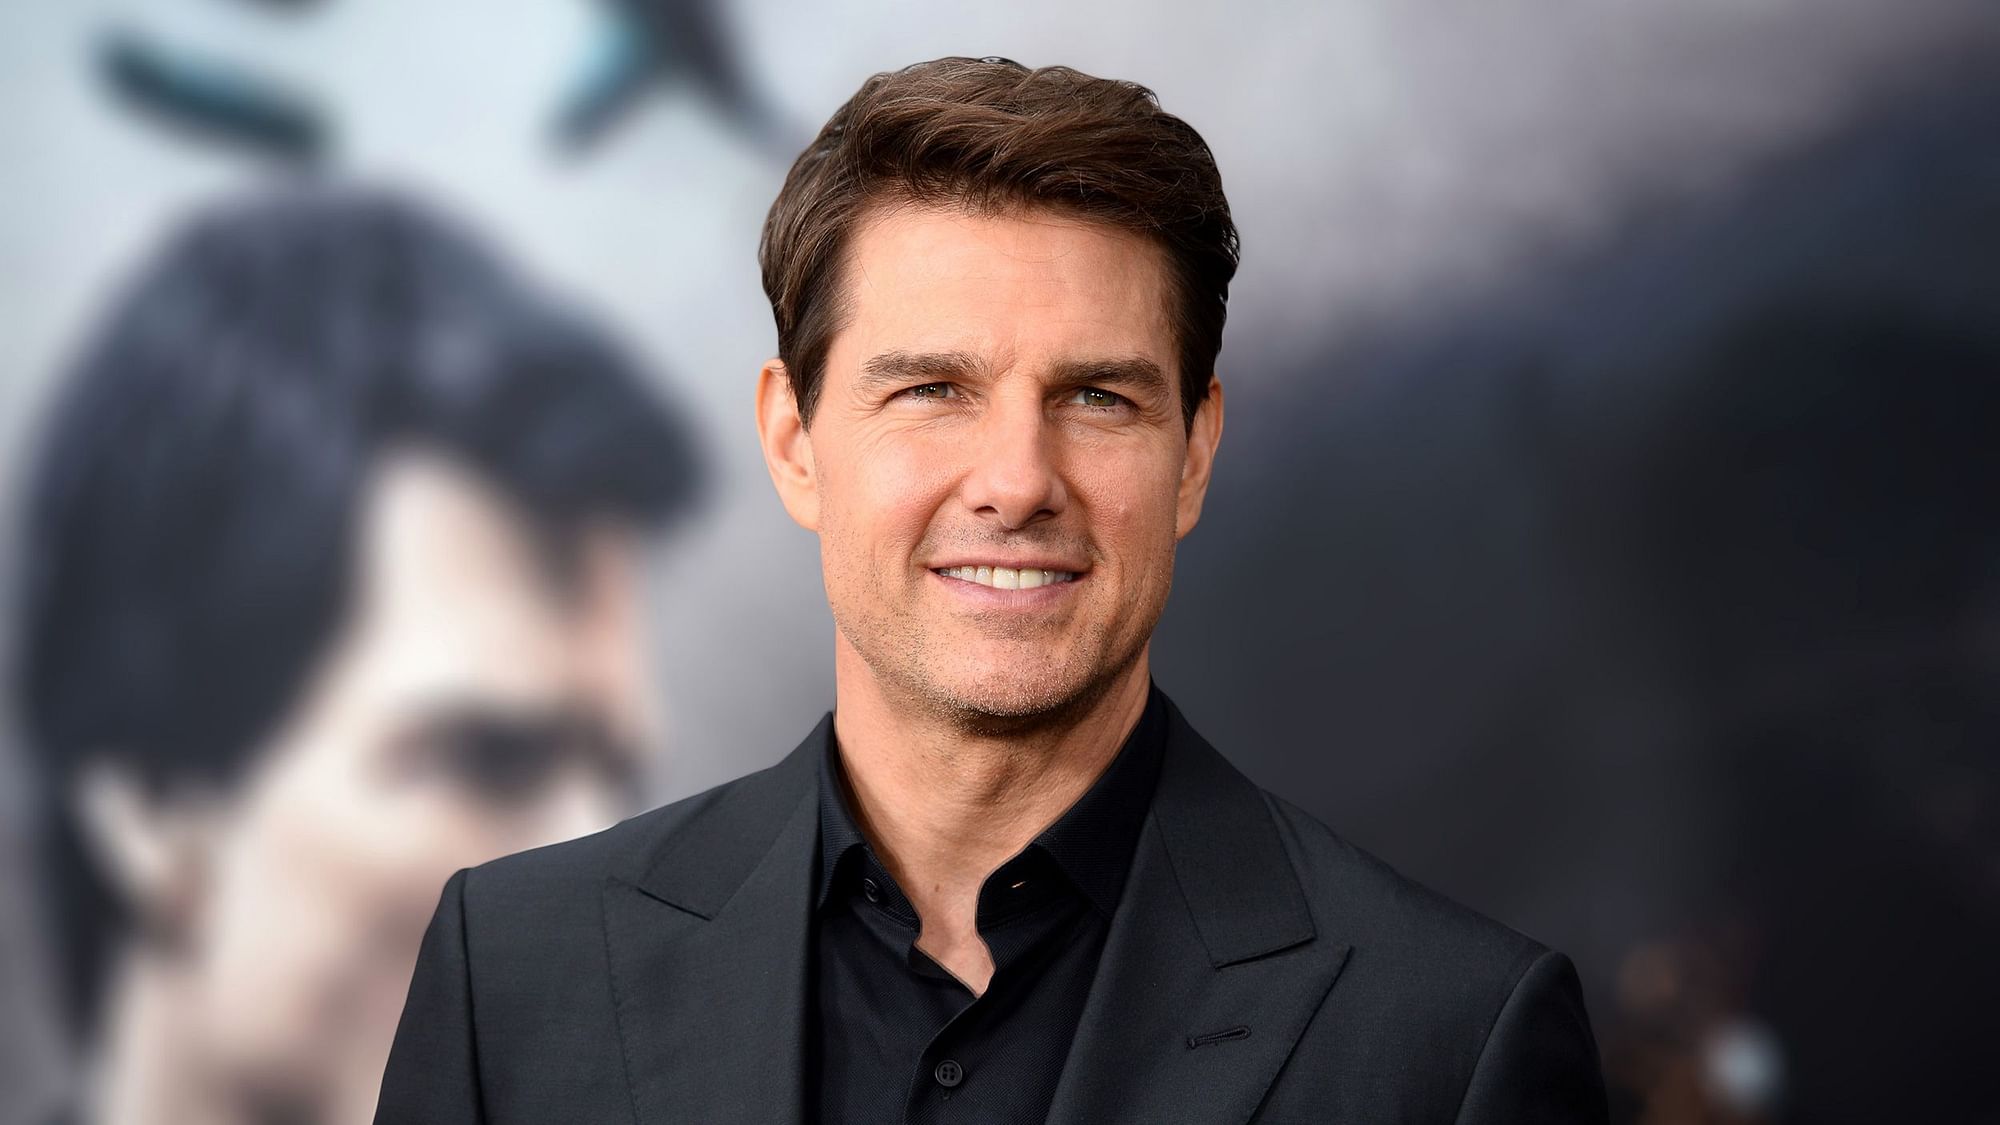 NASA confirmed that Tom Cruise will be starring in the first feature film to be shot in outer space.&nbsp;